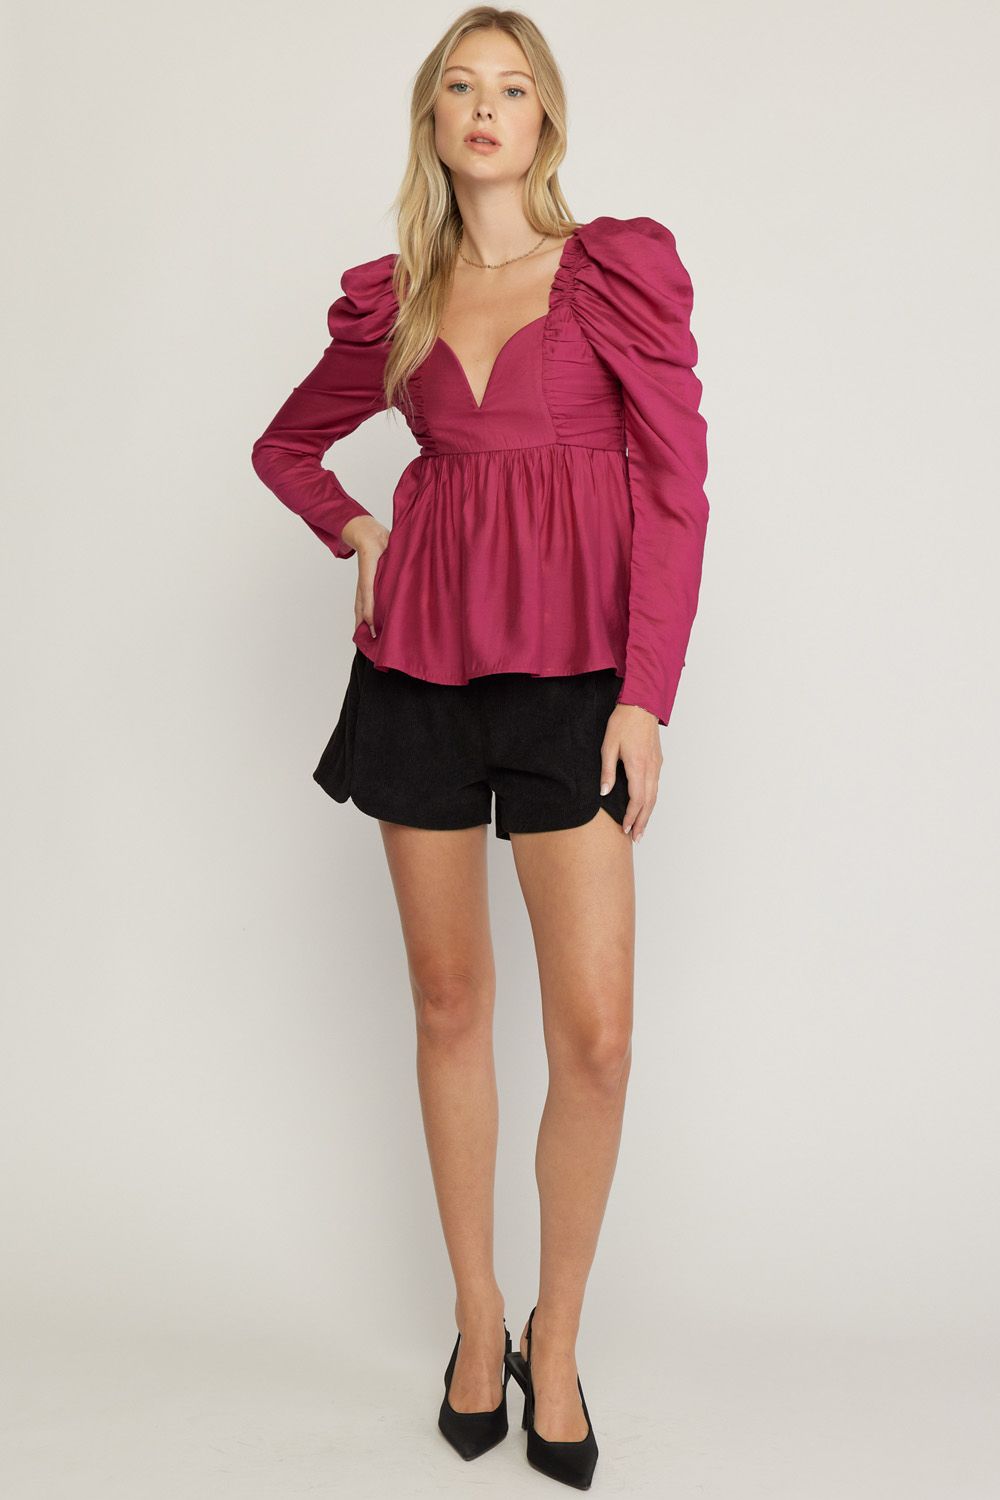 Sweetheart Neck Puff Shoulder Long Sleeve Top by Entro Clothing